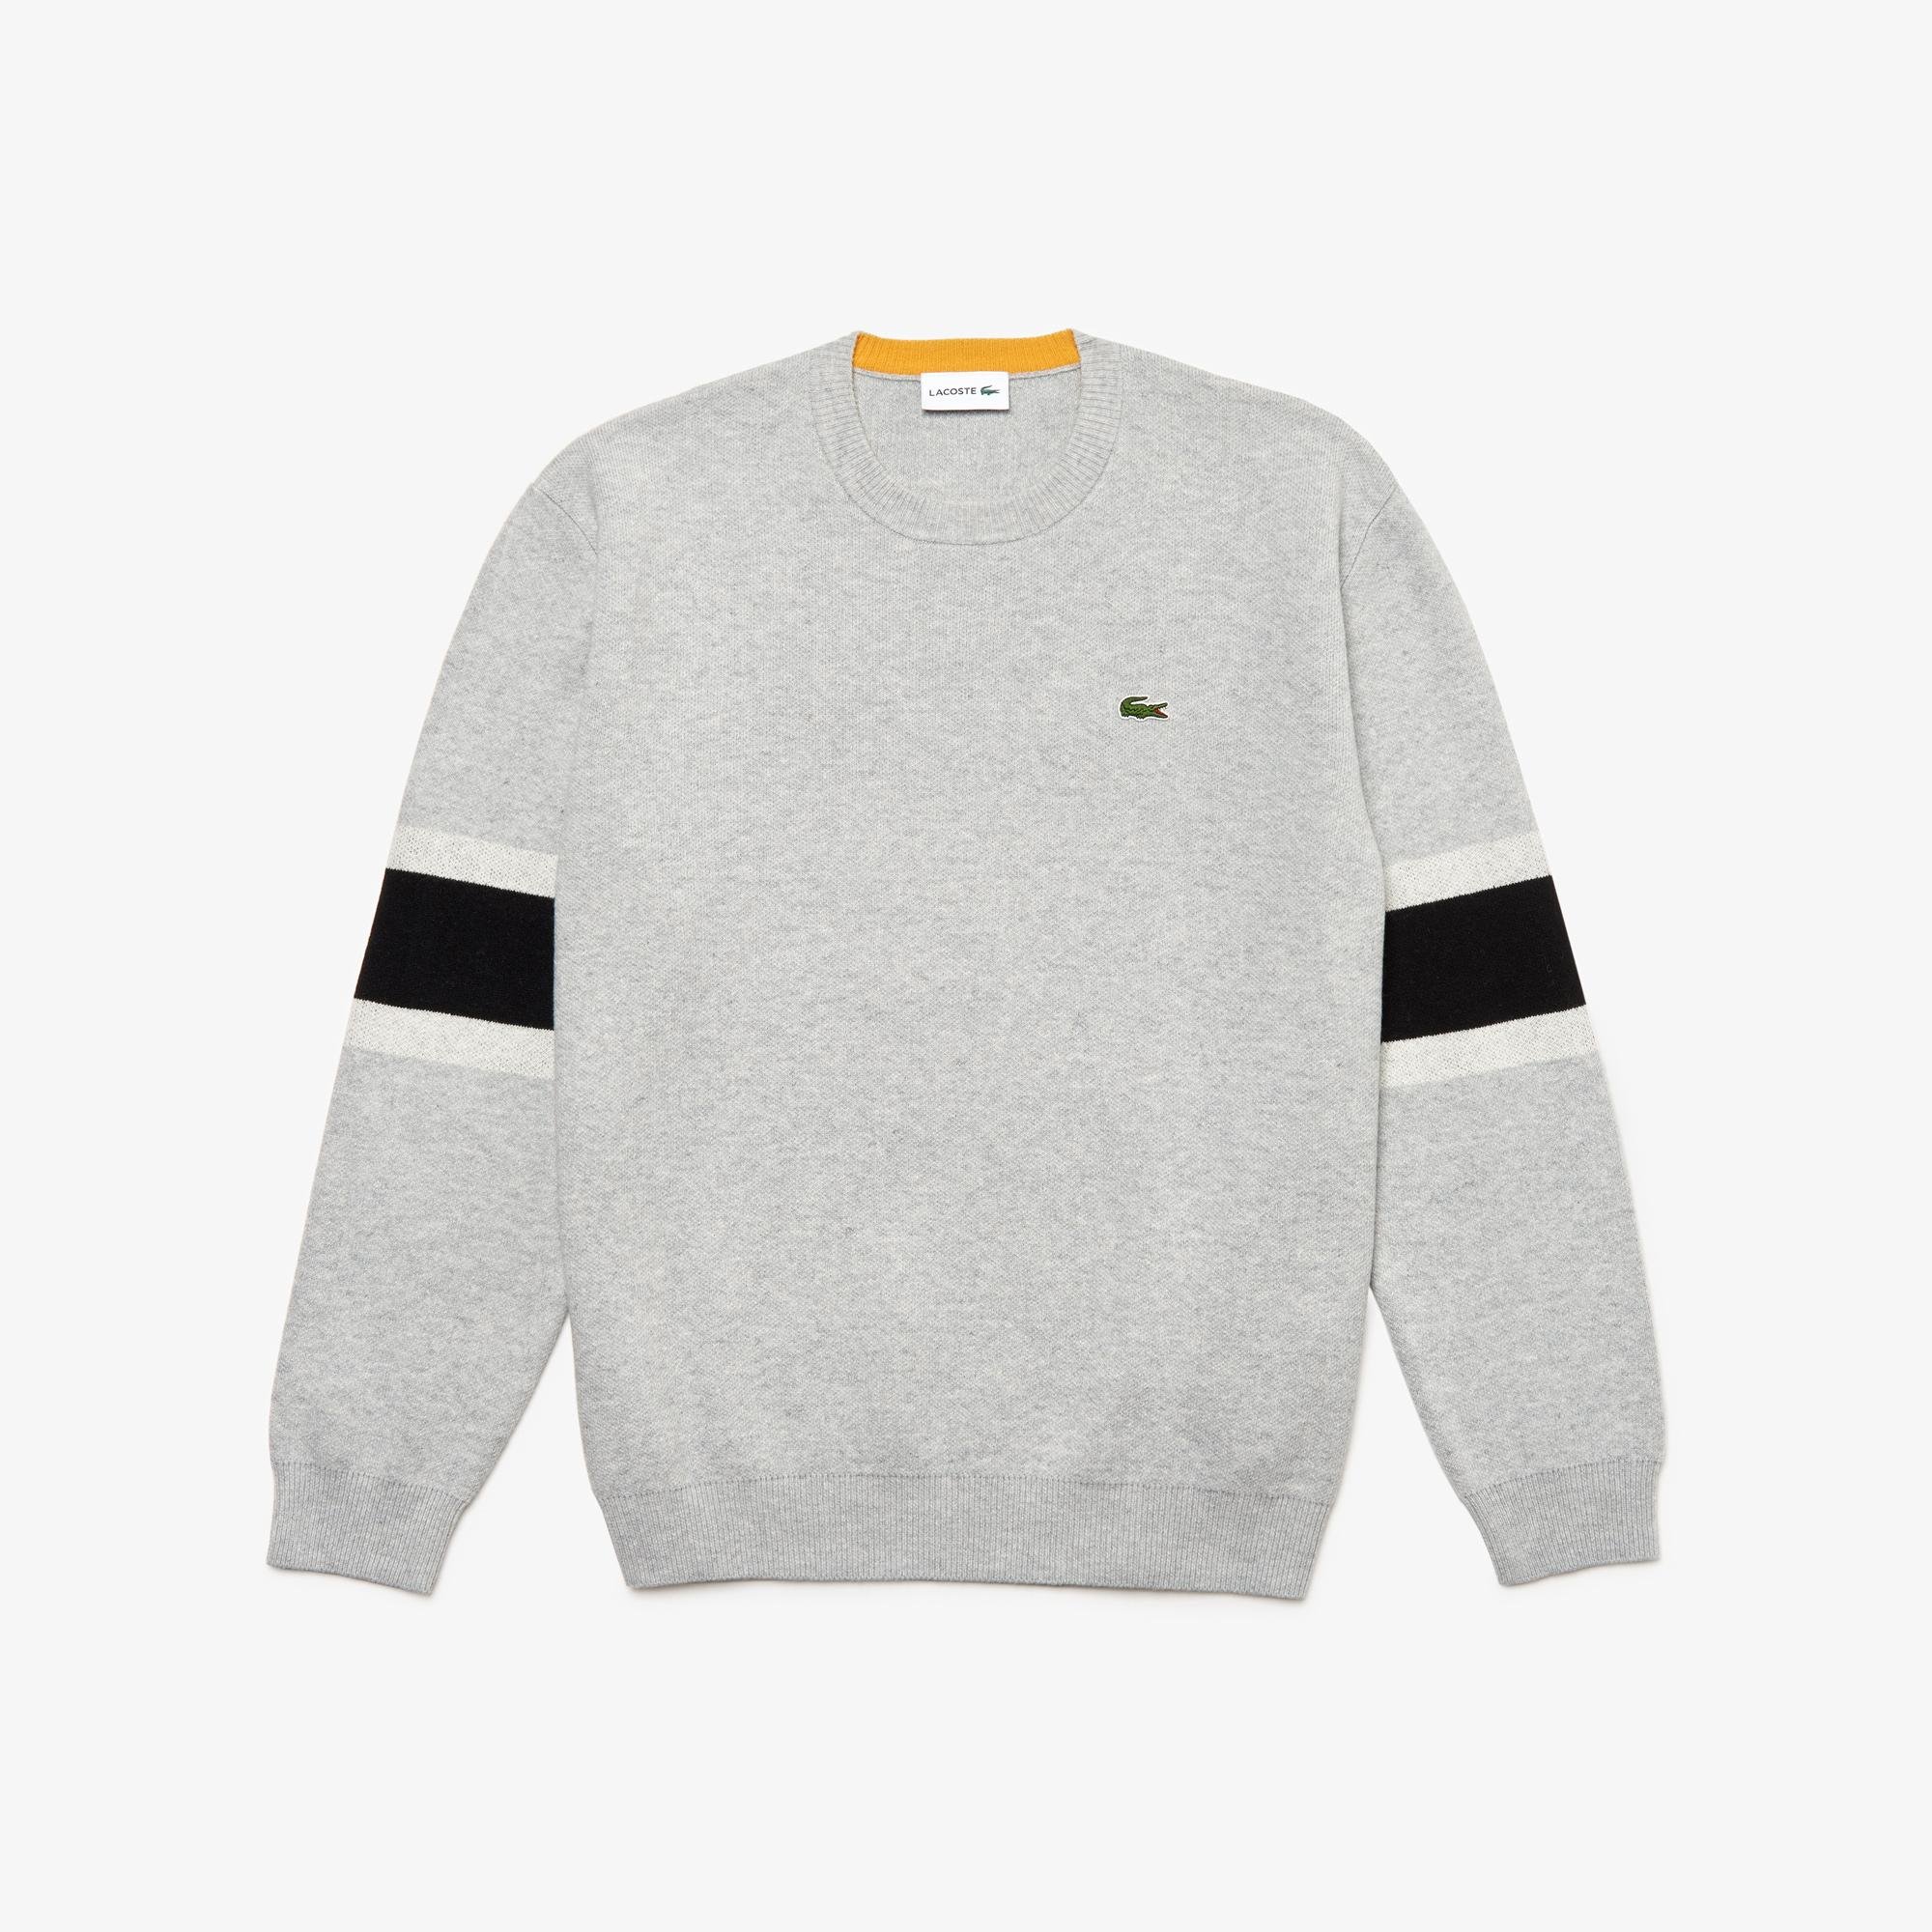 Lacoste Men's Crew Neck Contrast Bands Heathered Jacquard Sweater